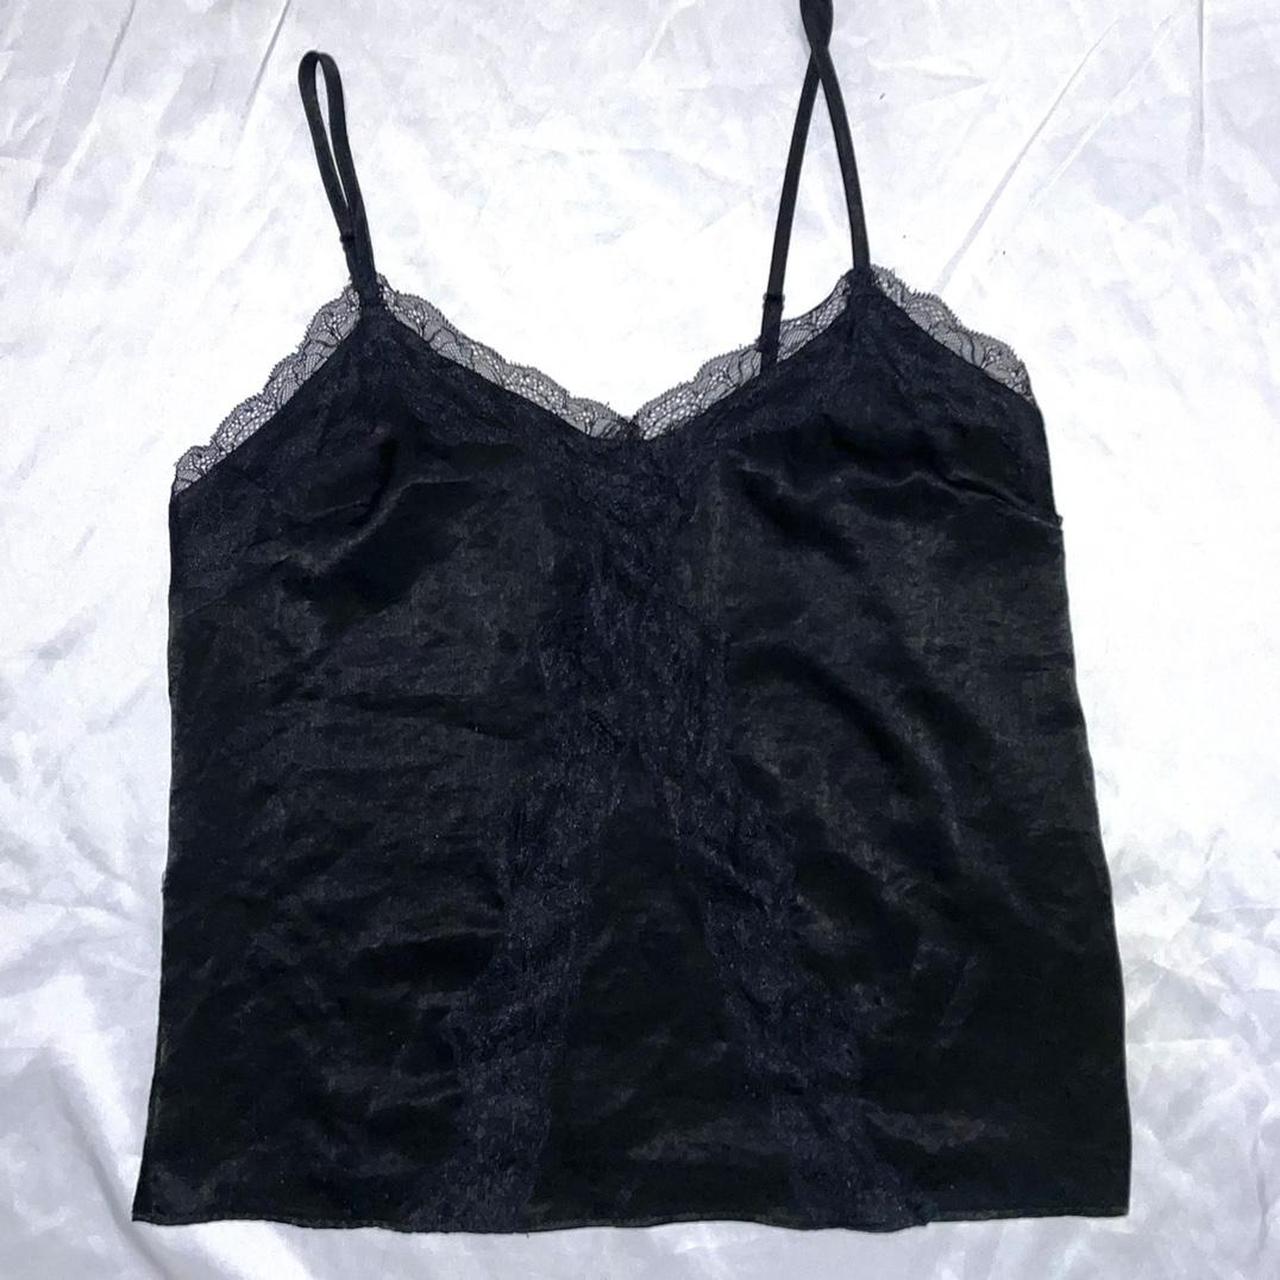 Topshop satin lace cami top in black